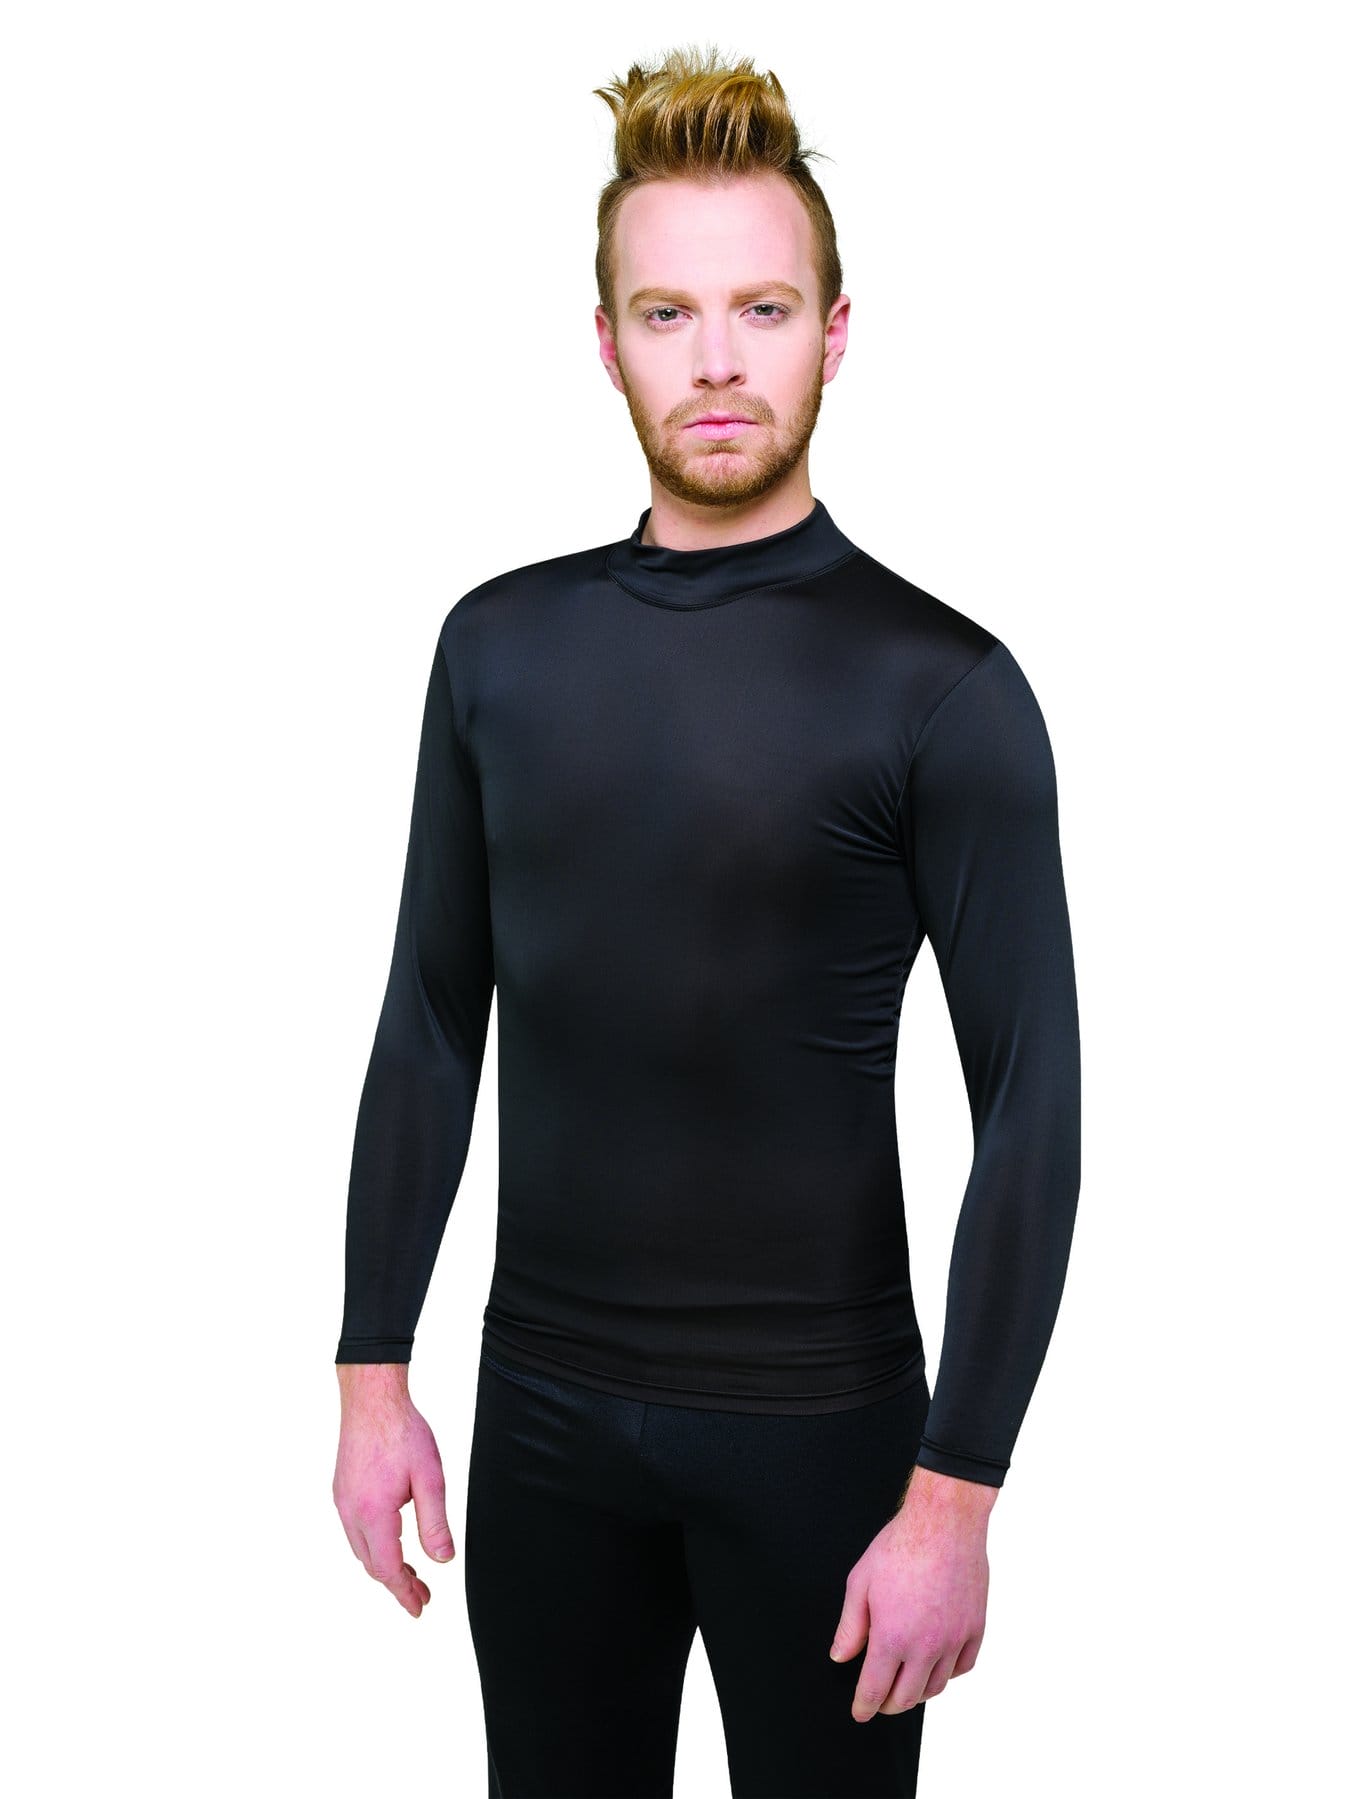 Styleplus Corelements Cool Long Sleeve Compression Shirts for Color Guard,  Band and Percussion Uniforms - Drillcomp, Inc.